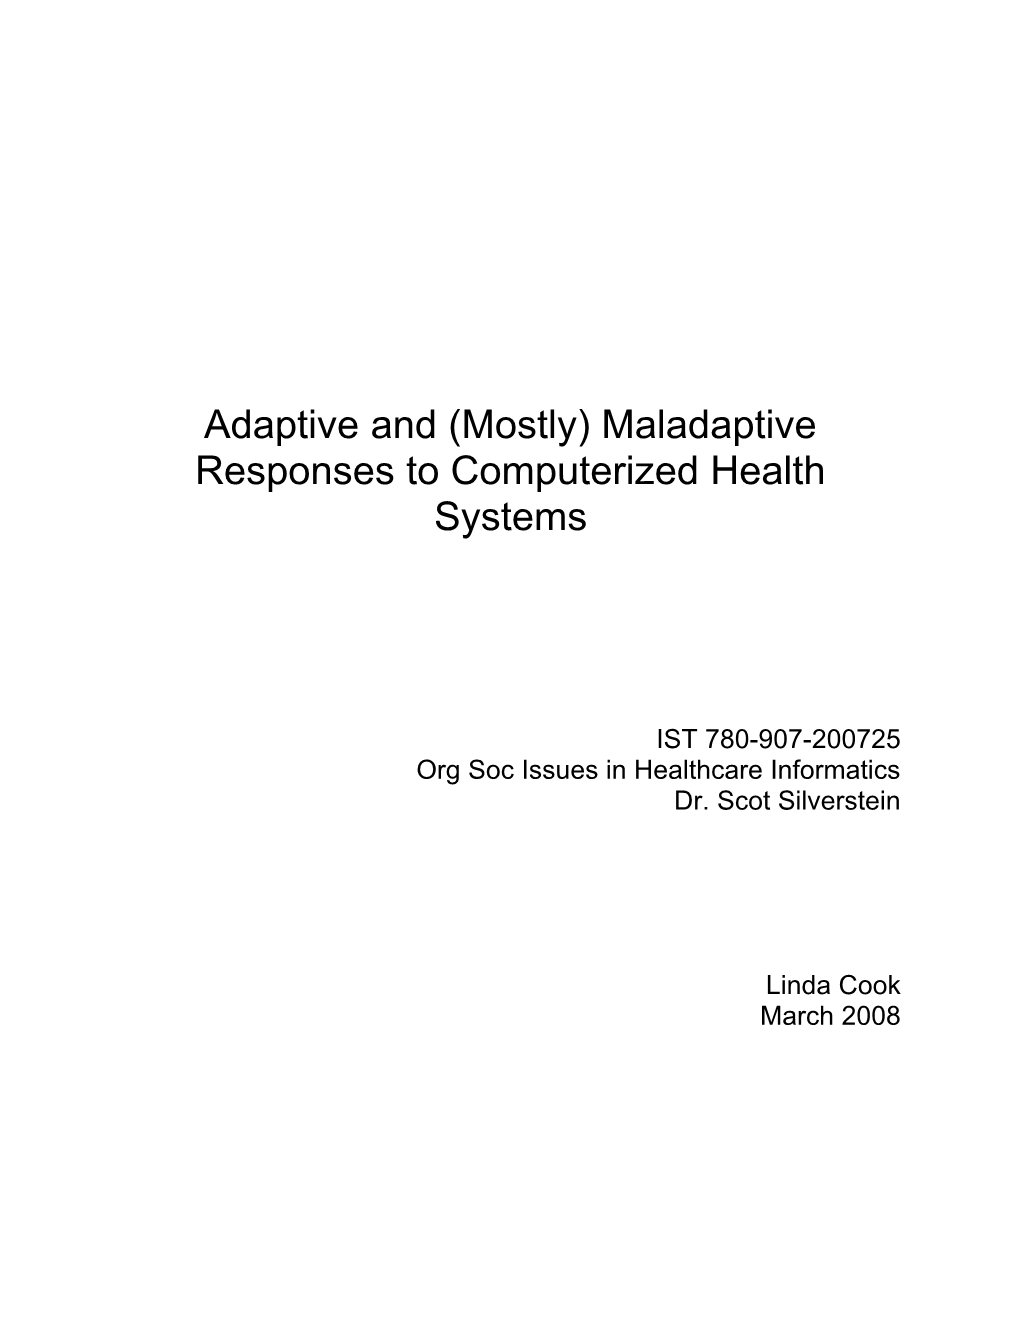 Adapative and (Mostly) Maladaptive Responses to Computerized Health Systems